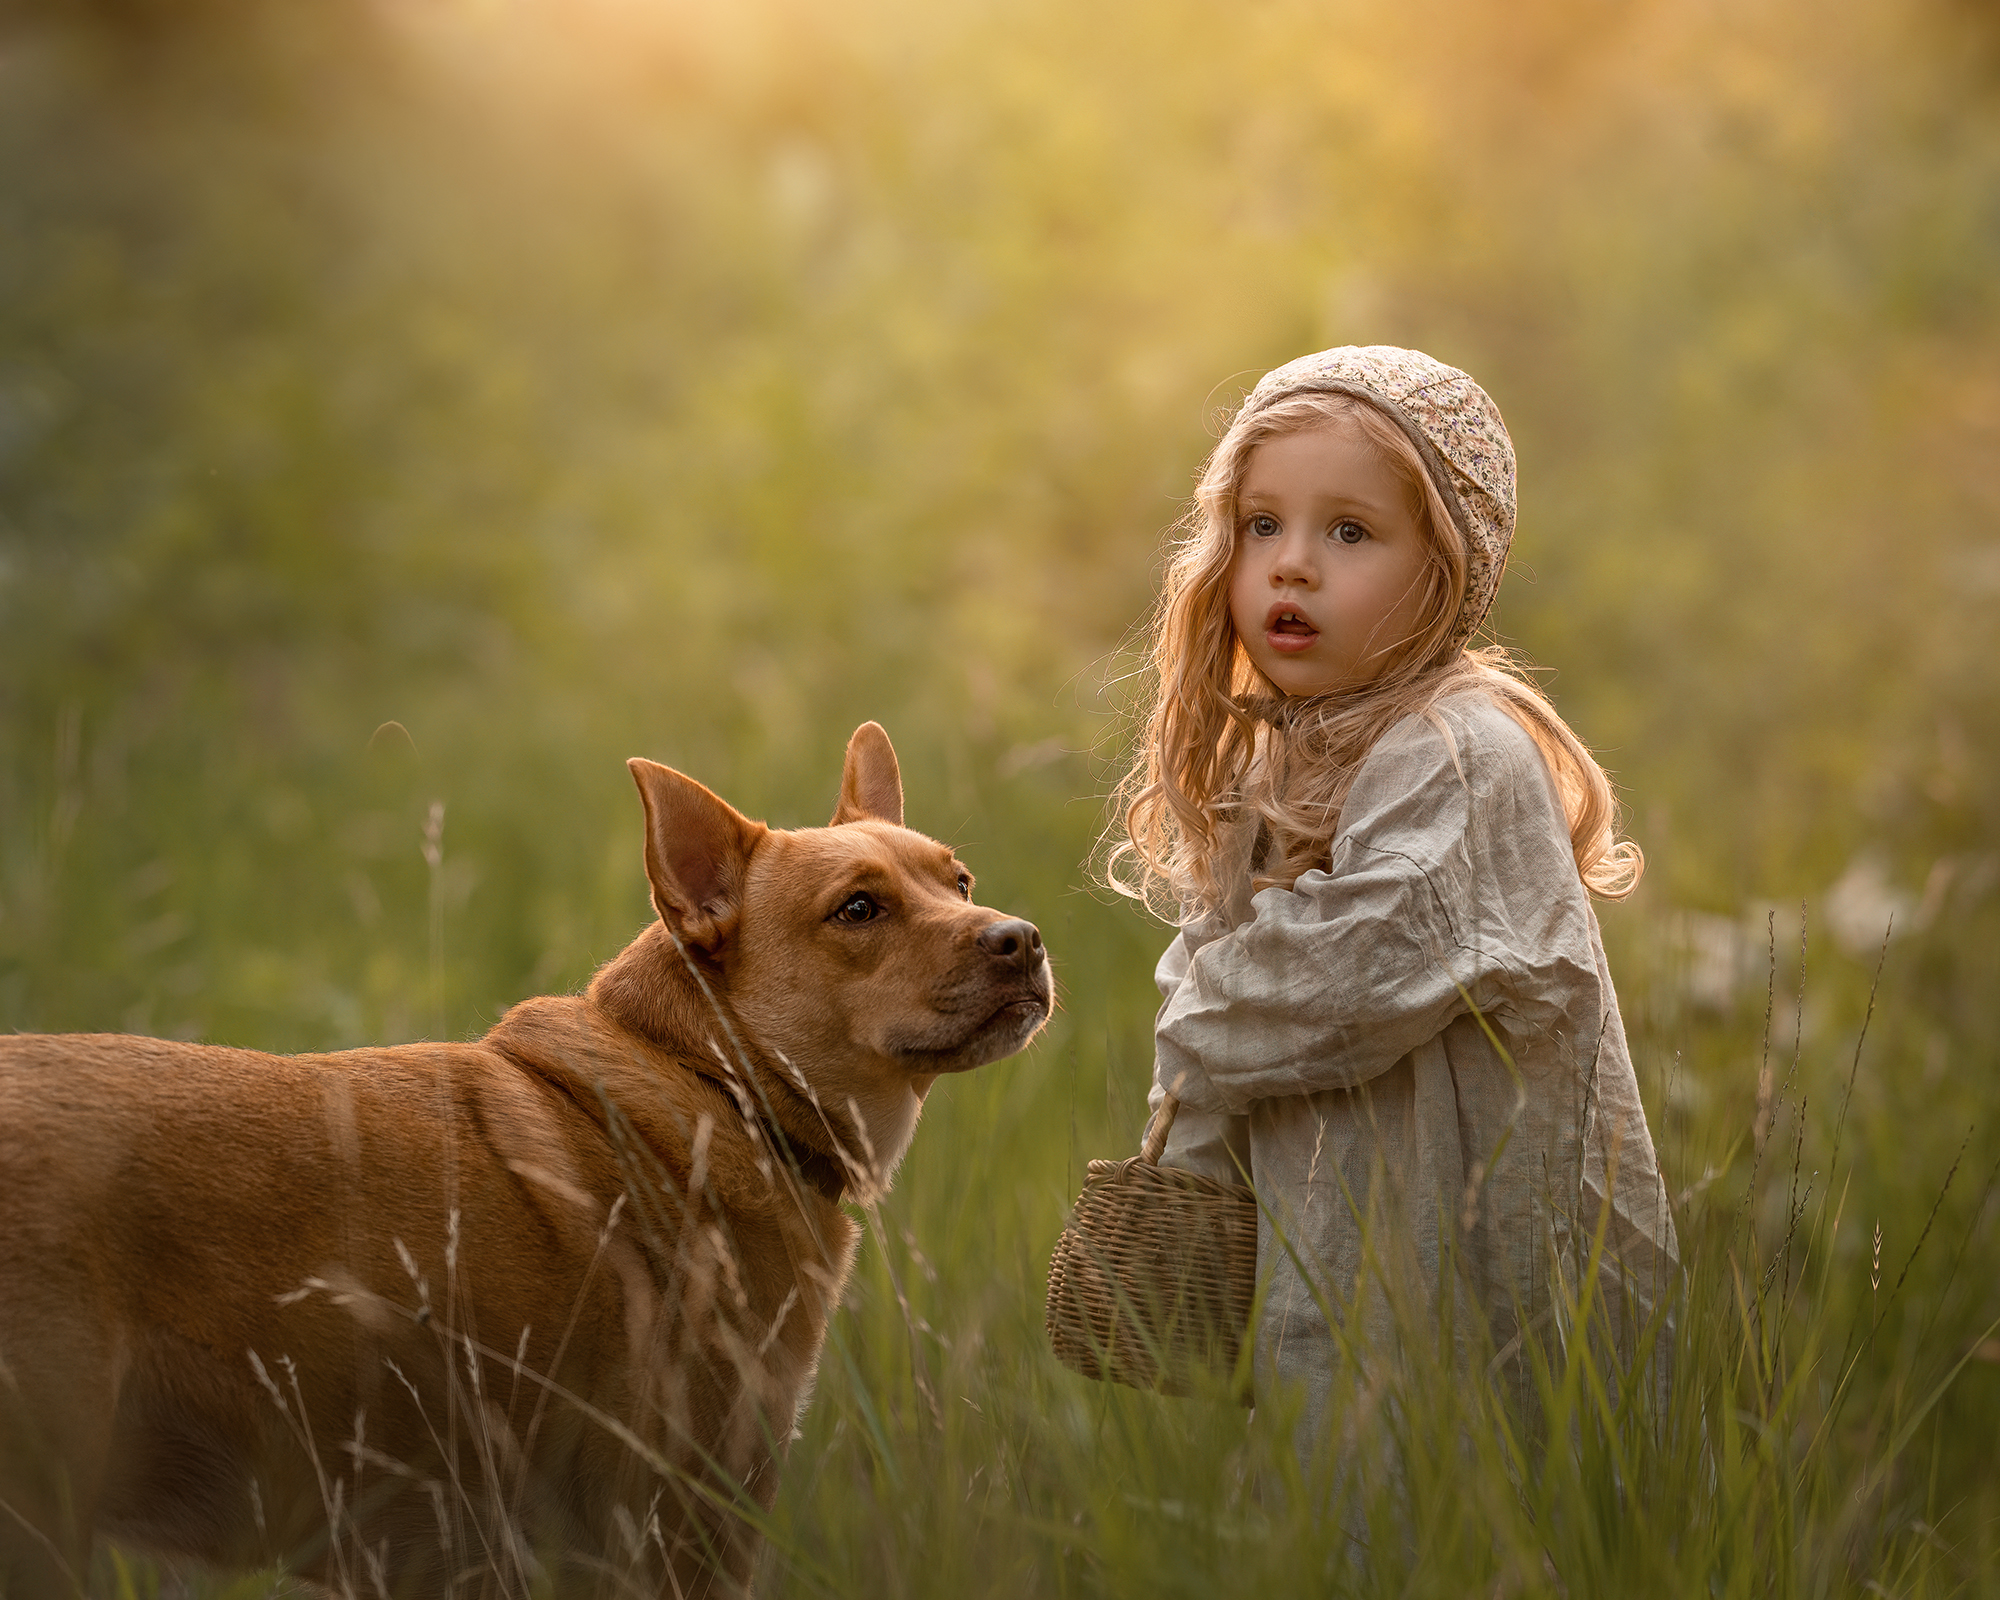 Little girl and her dog playing at the yard on a summer day